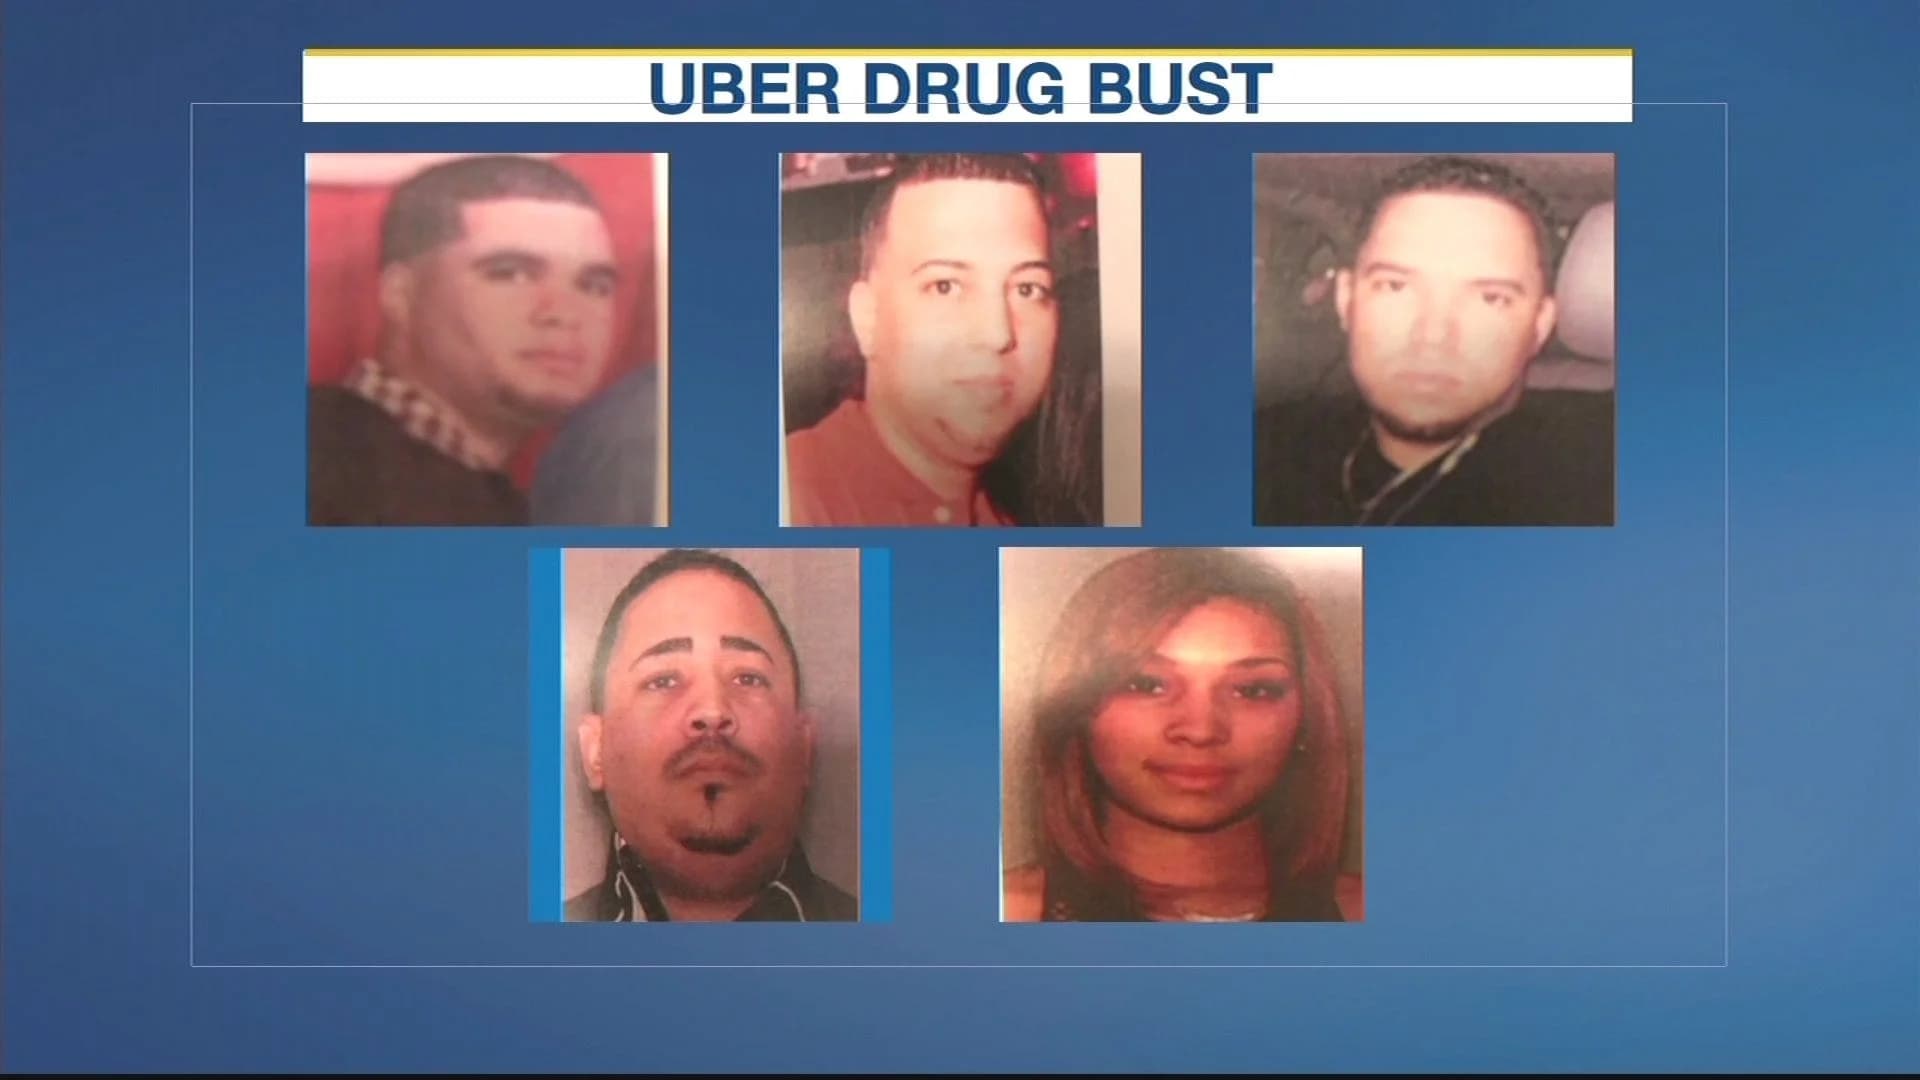 Authorities: Fake Uber drivers delivered drugs across city